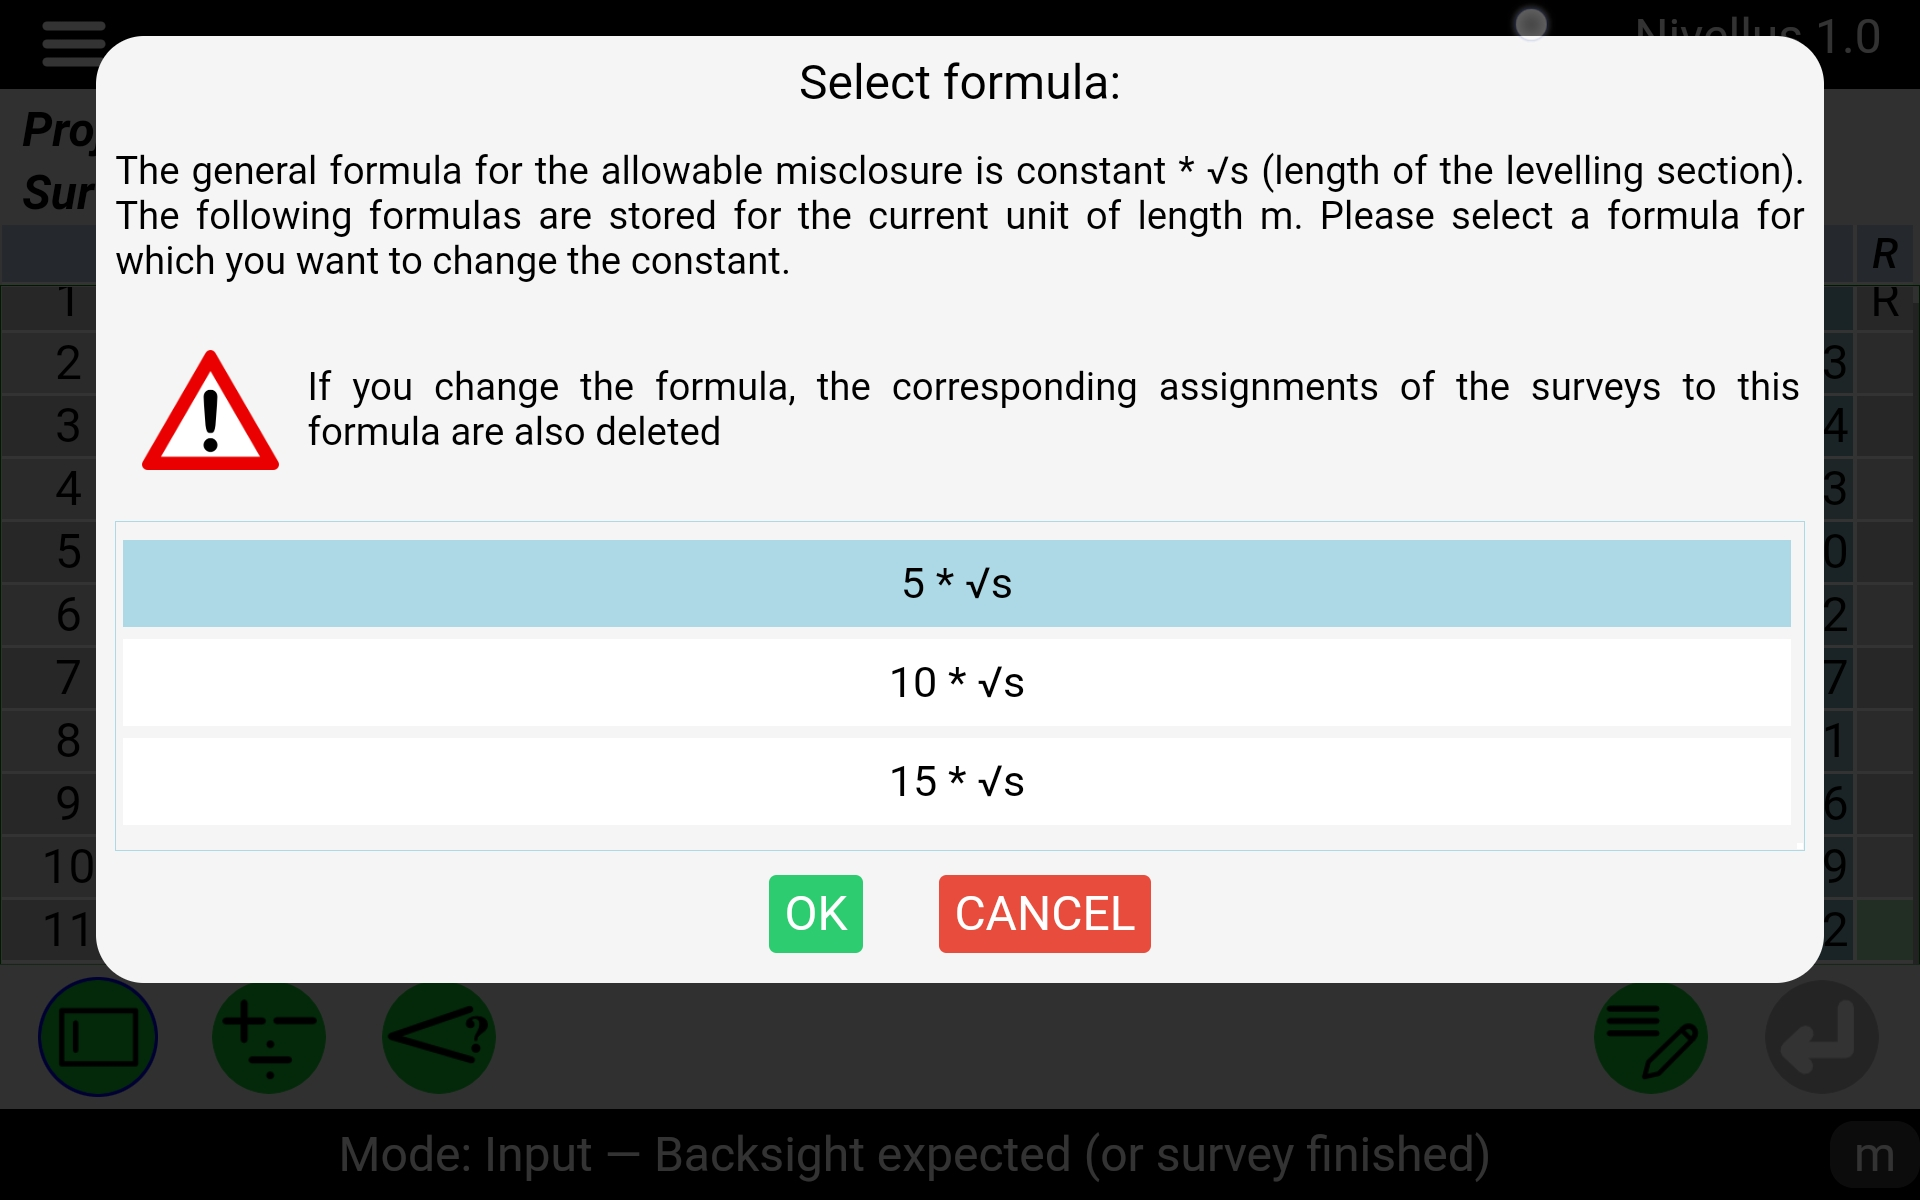 Edit the constant of the formula of allowable misclosure